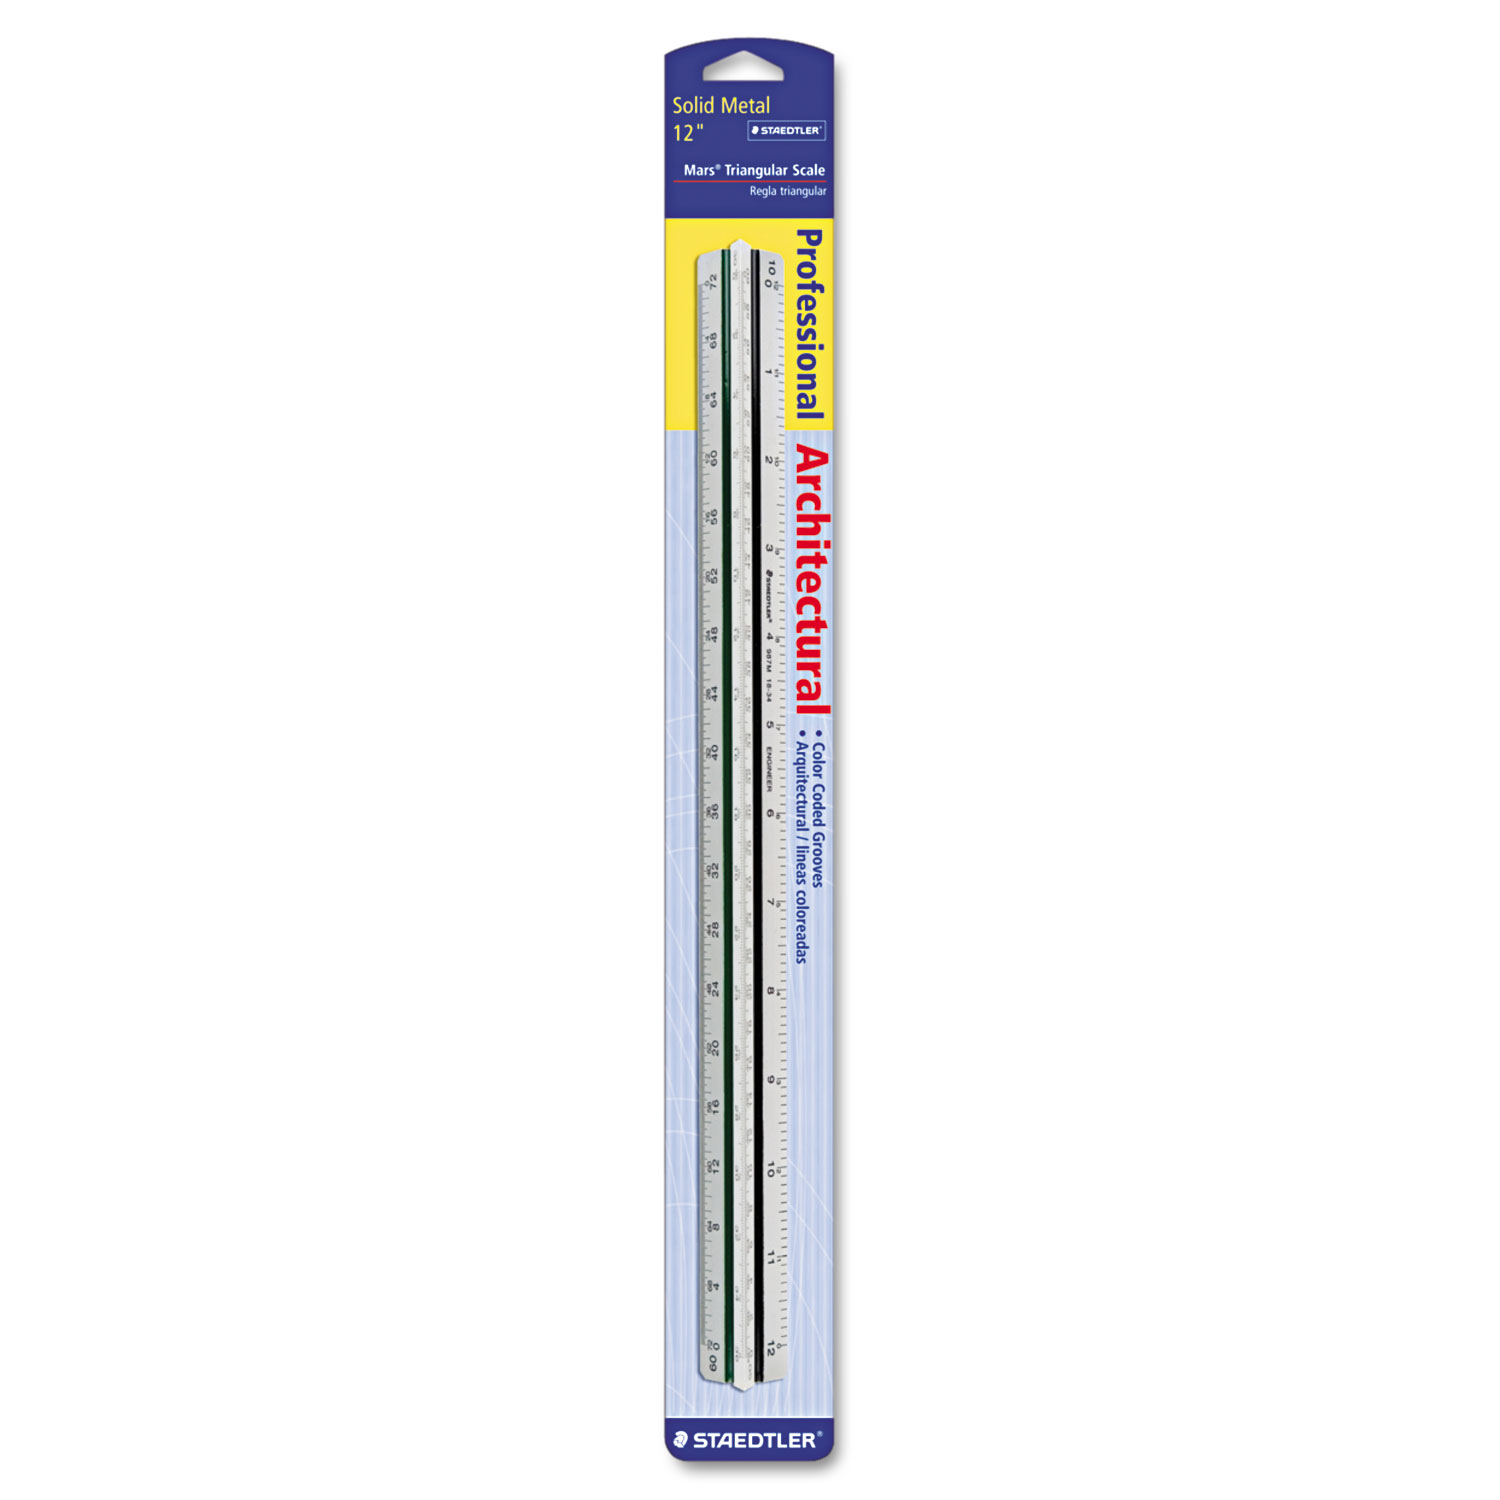 Staedtler® Triangular Scale for Architects, Color-Coded Grooves, 12 inches